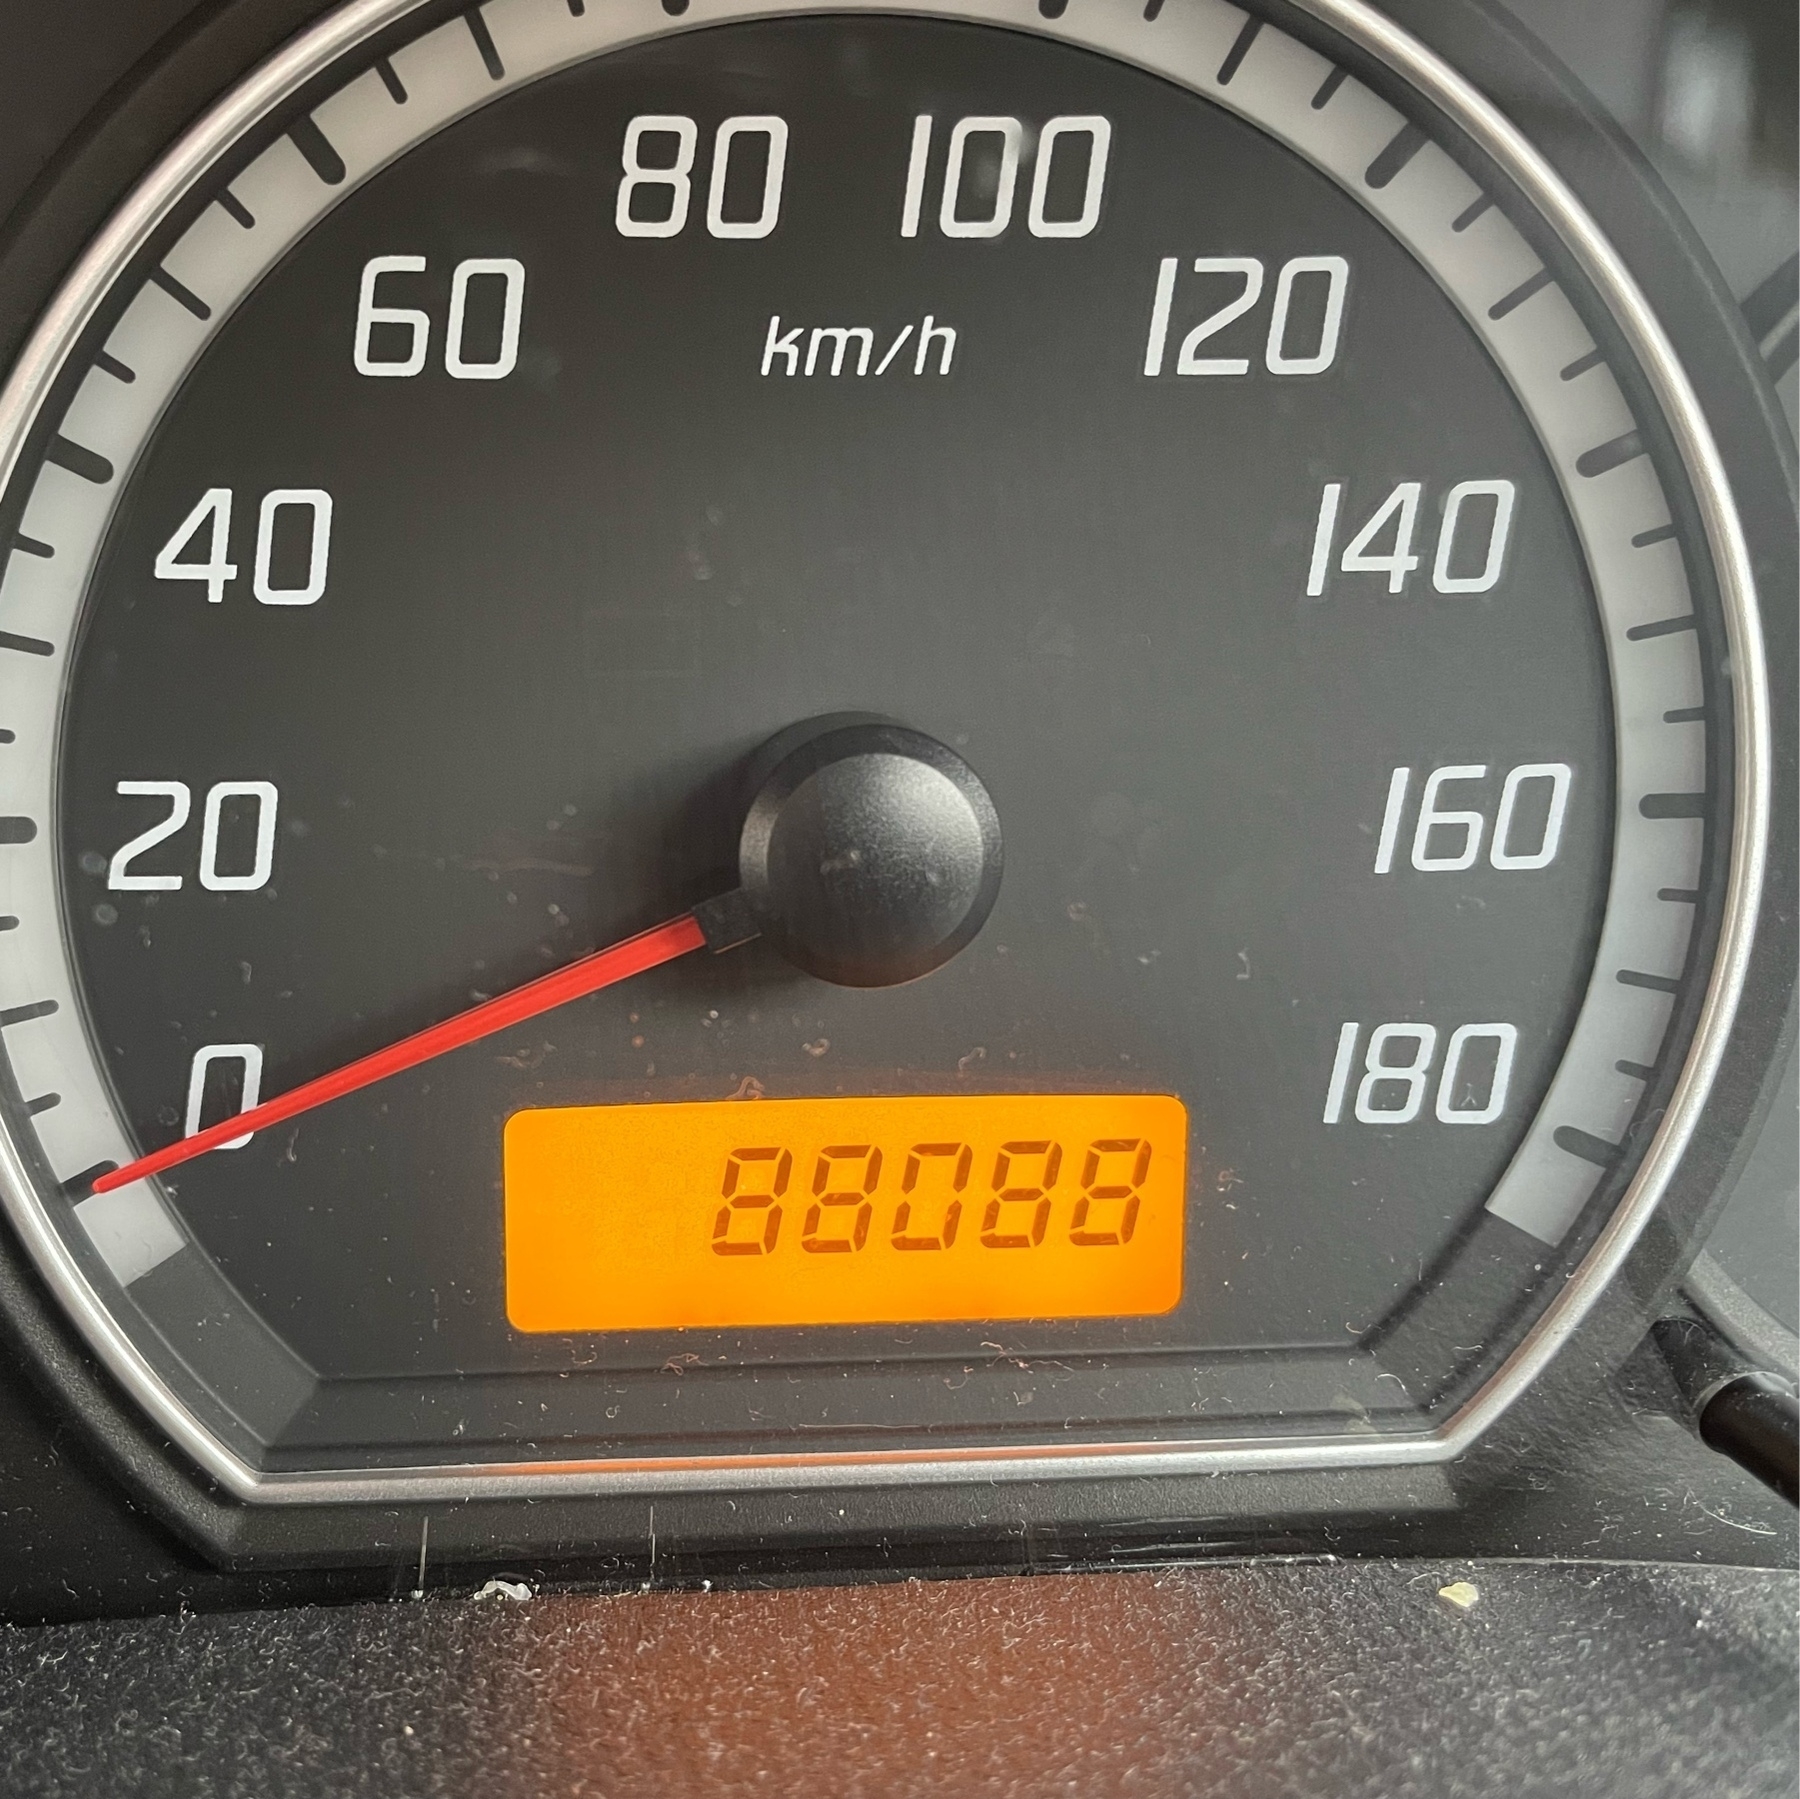 The odometer in my car reading 88088